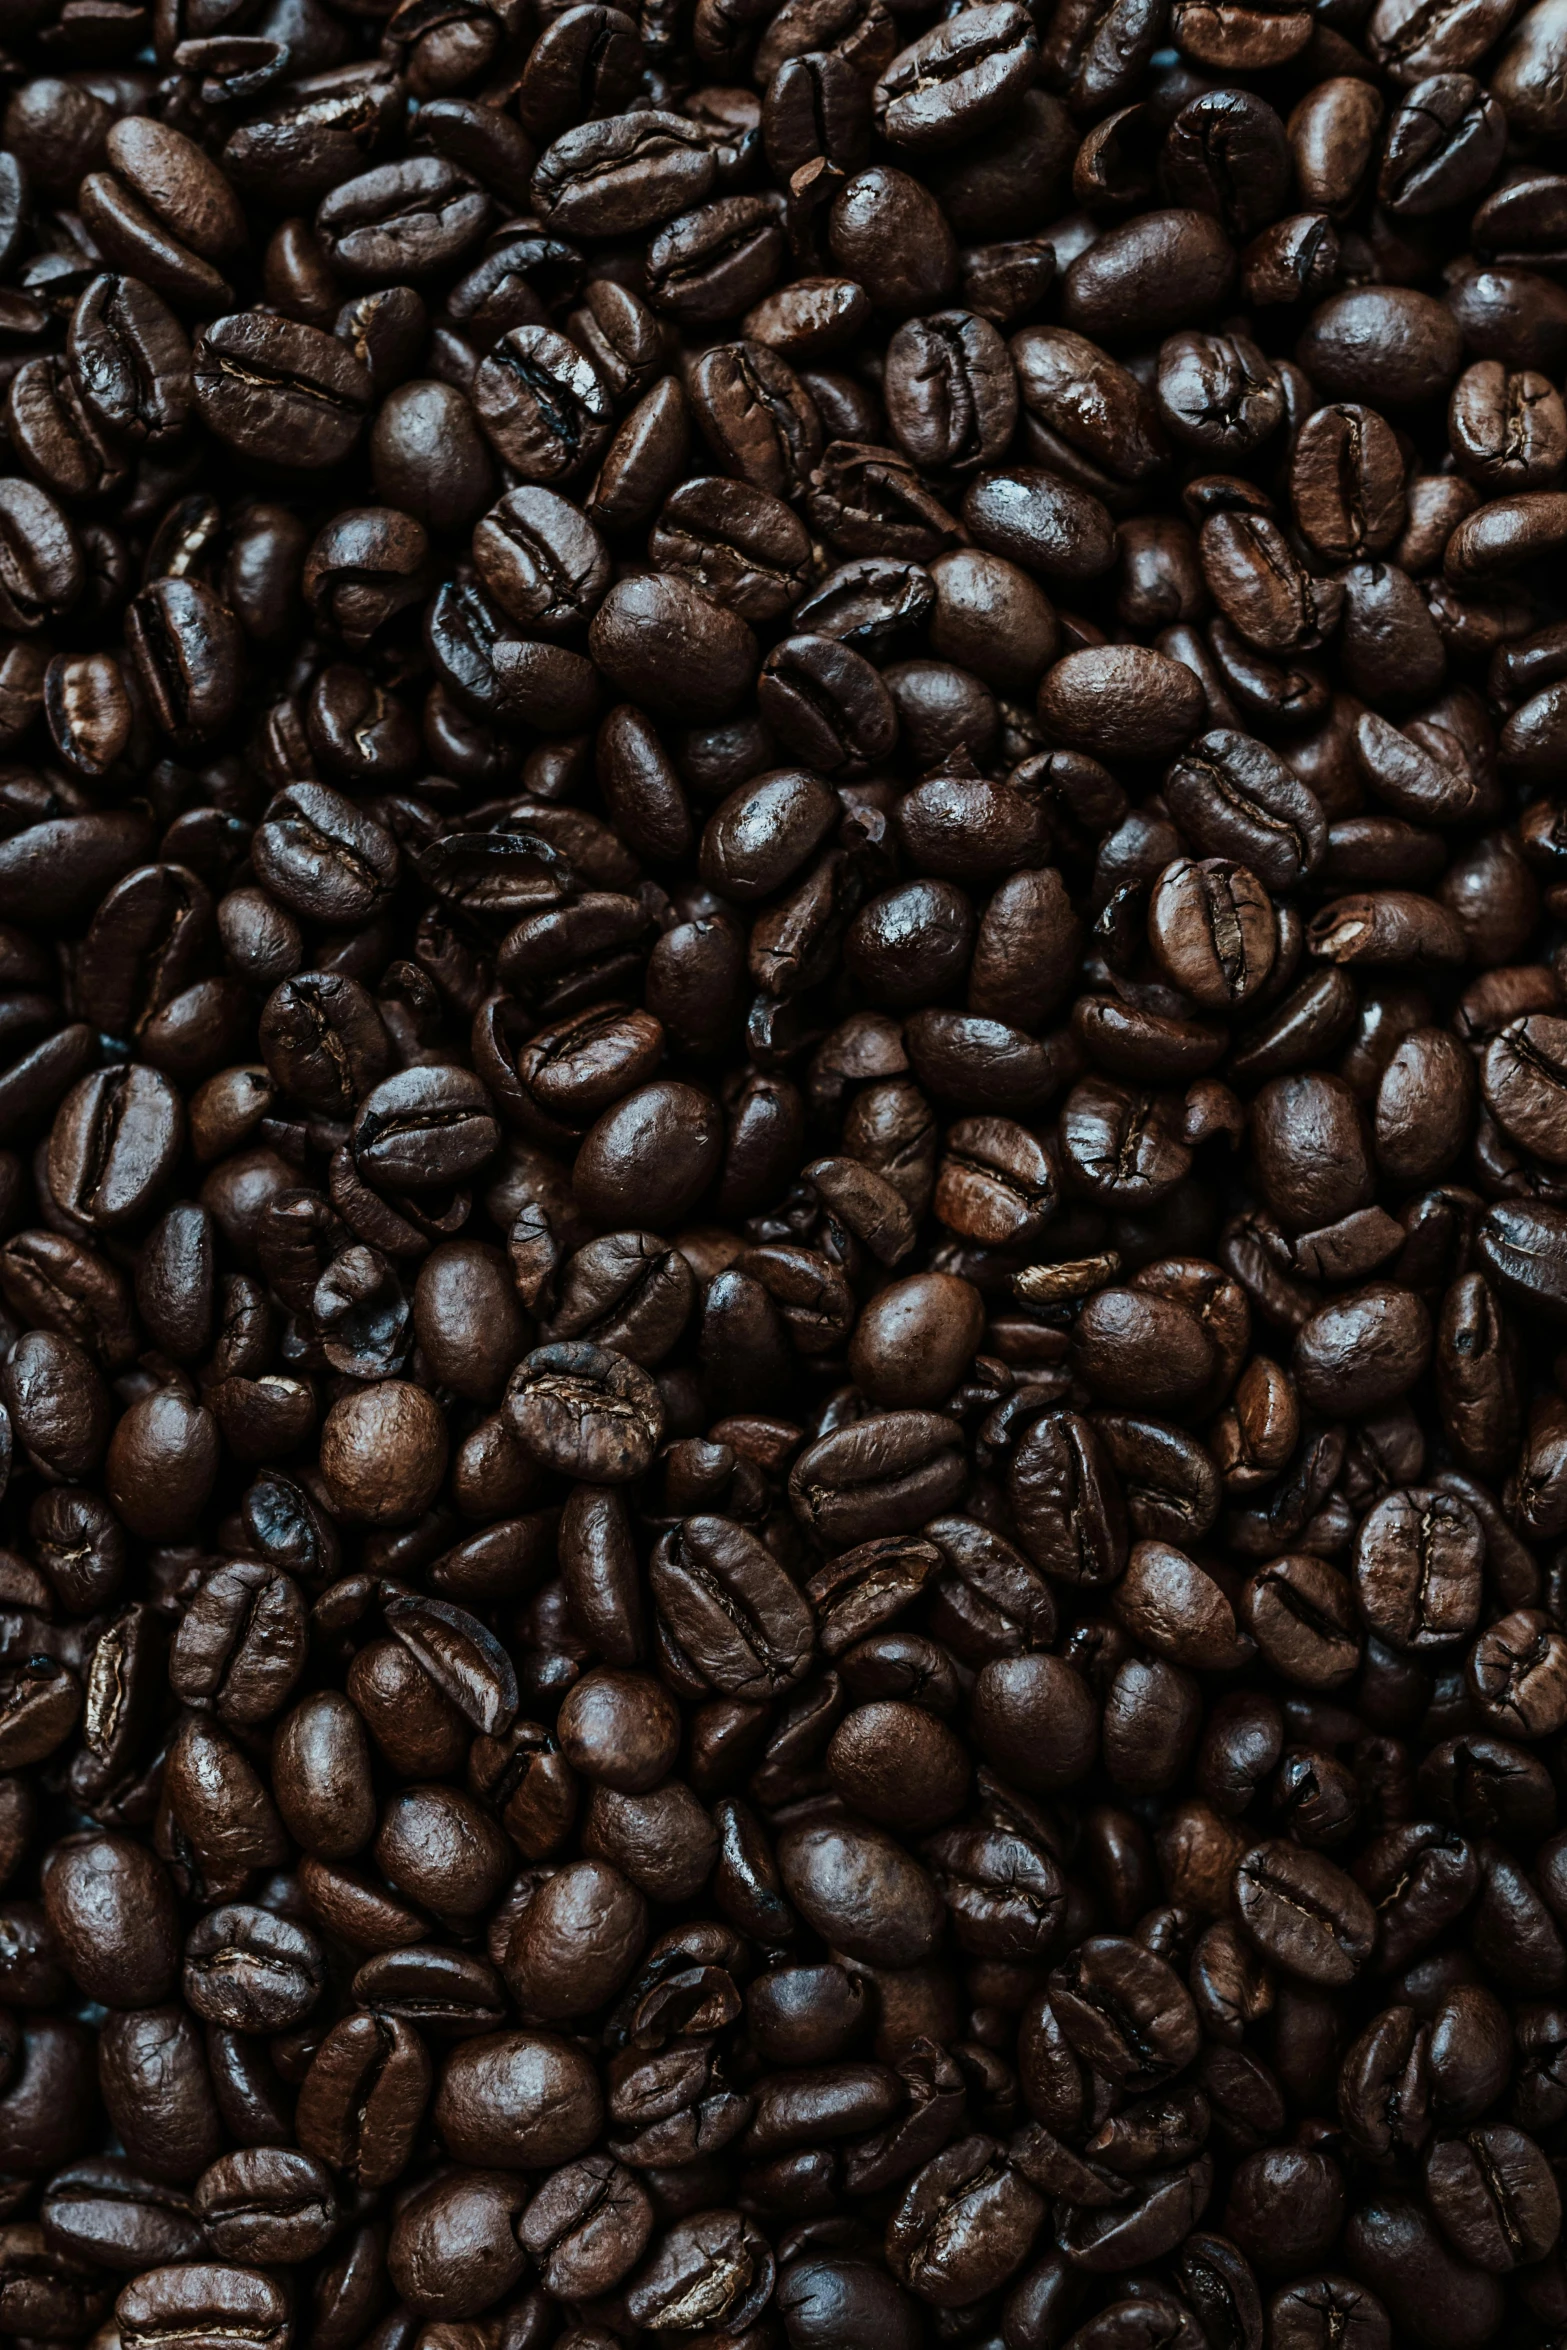 a pile of coffee beans are spread across the surface